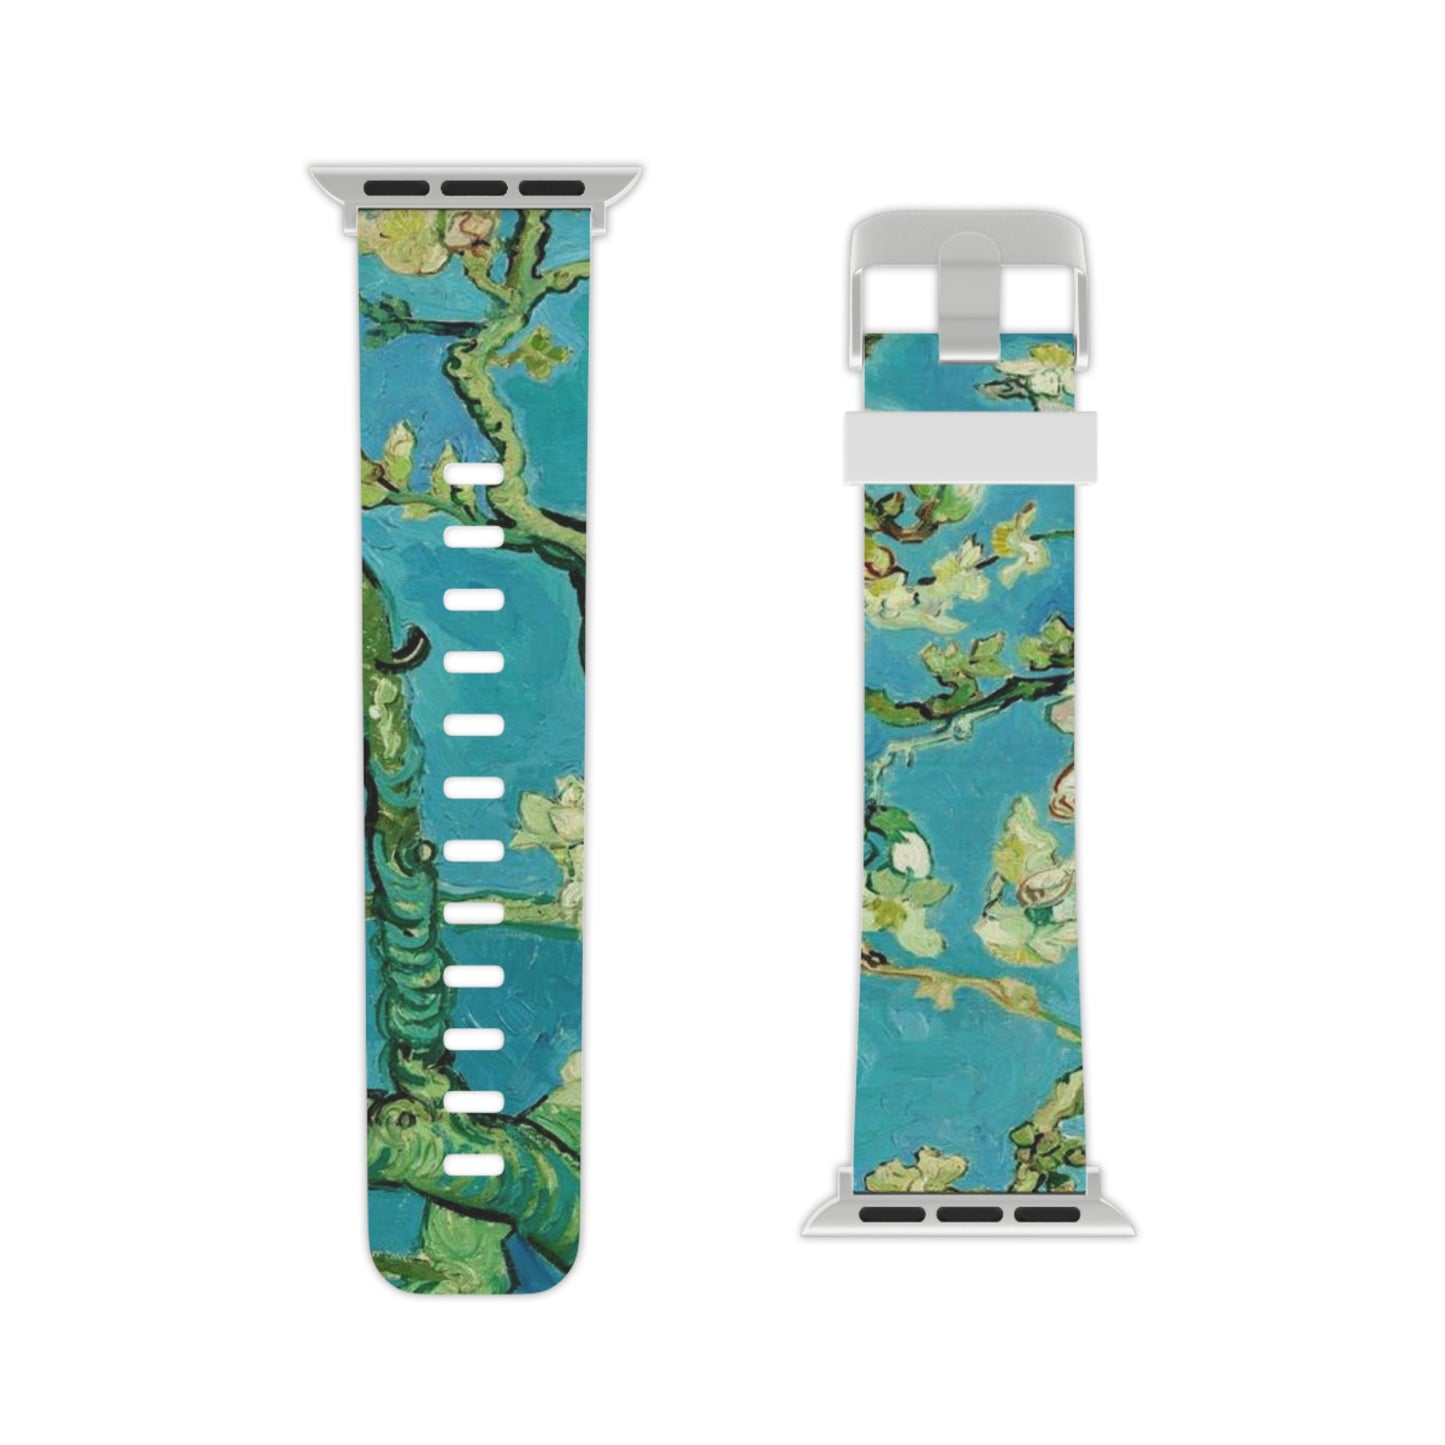 VINCENT VAN GOGH - ALMOND BLOSSOMS - ART WATCH BAND FOR APPLE WATCH